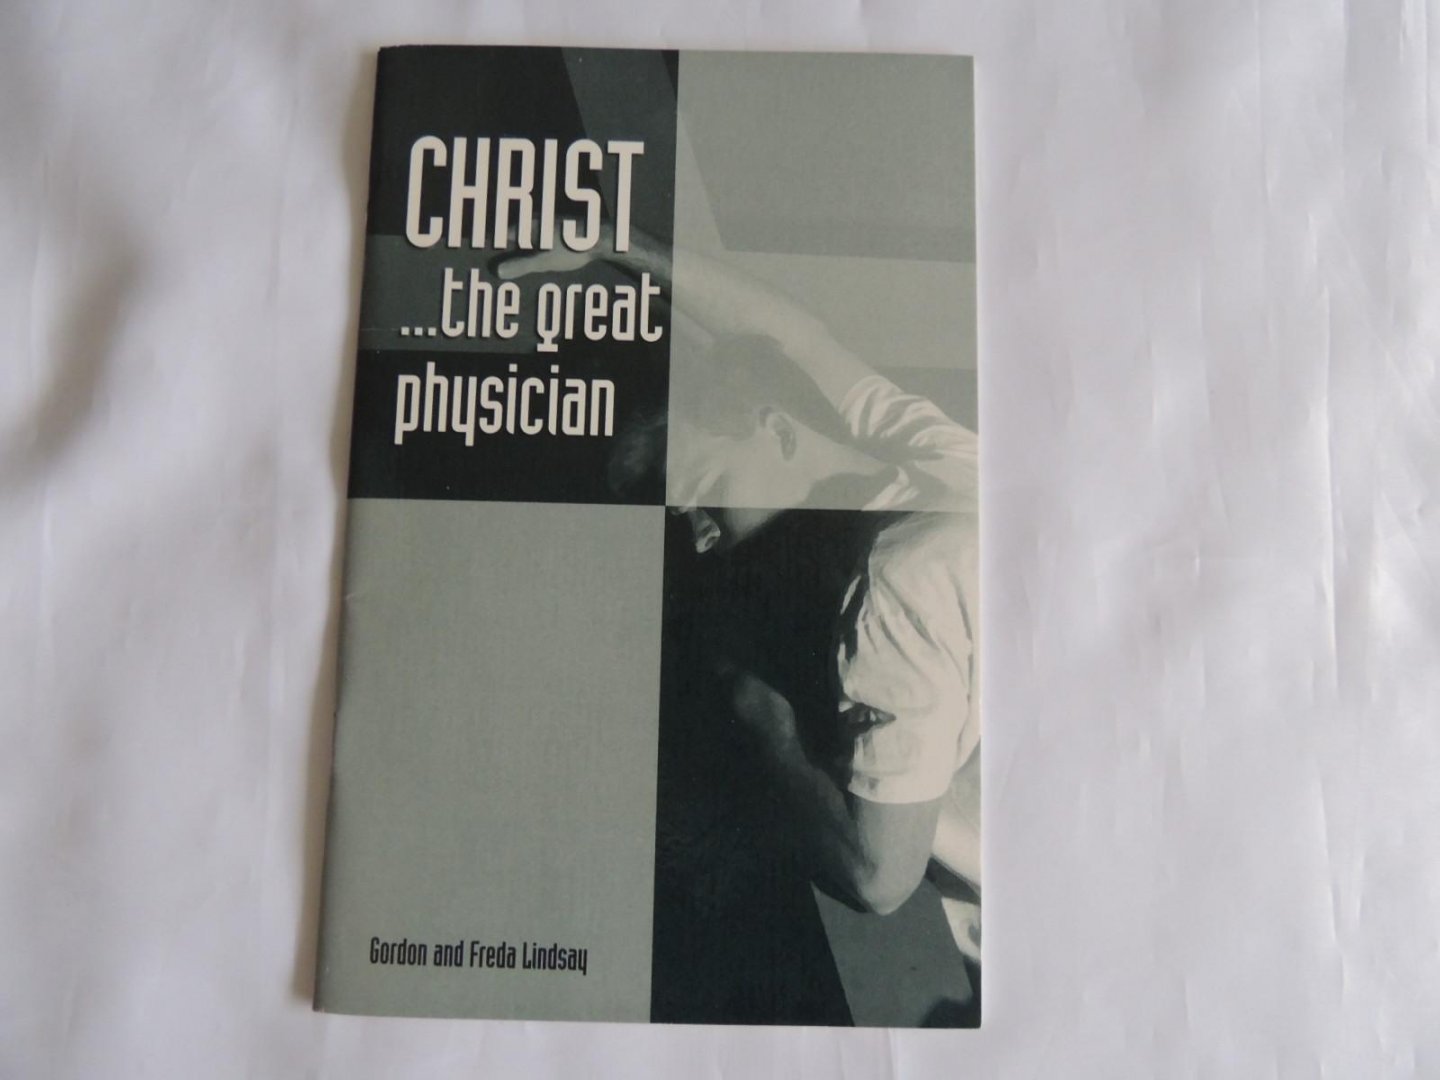 LINDSAY GORDON AND FREDA - CHRIST THE GREAT PHYSICIAN -- HOW YOU CAN HAVE DIVINE HEALTH